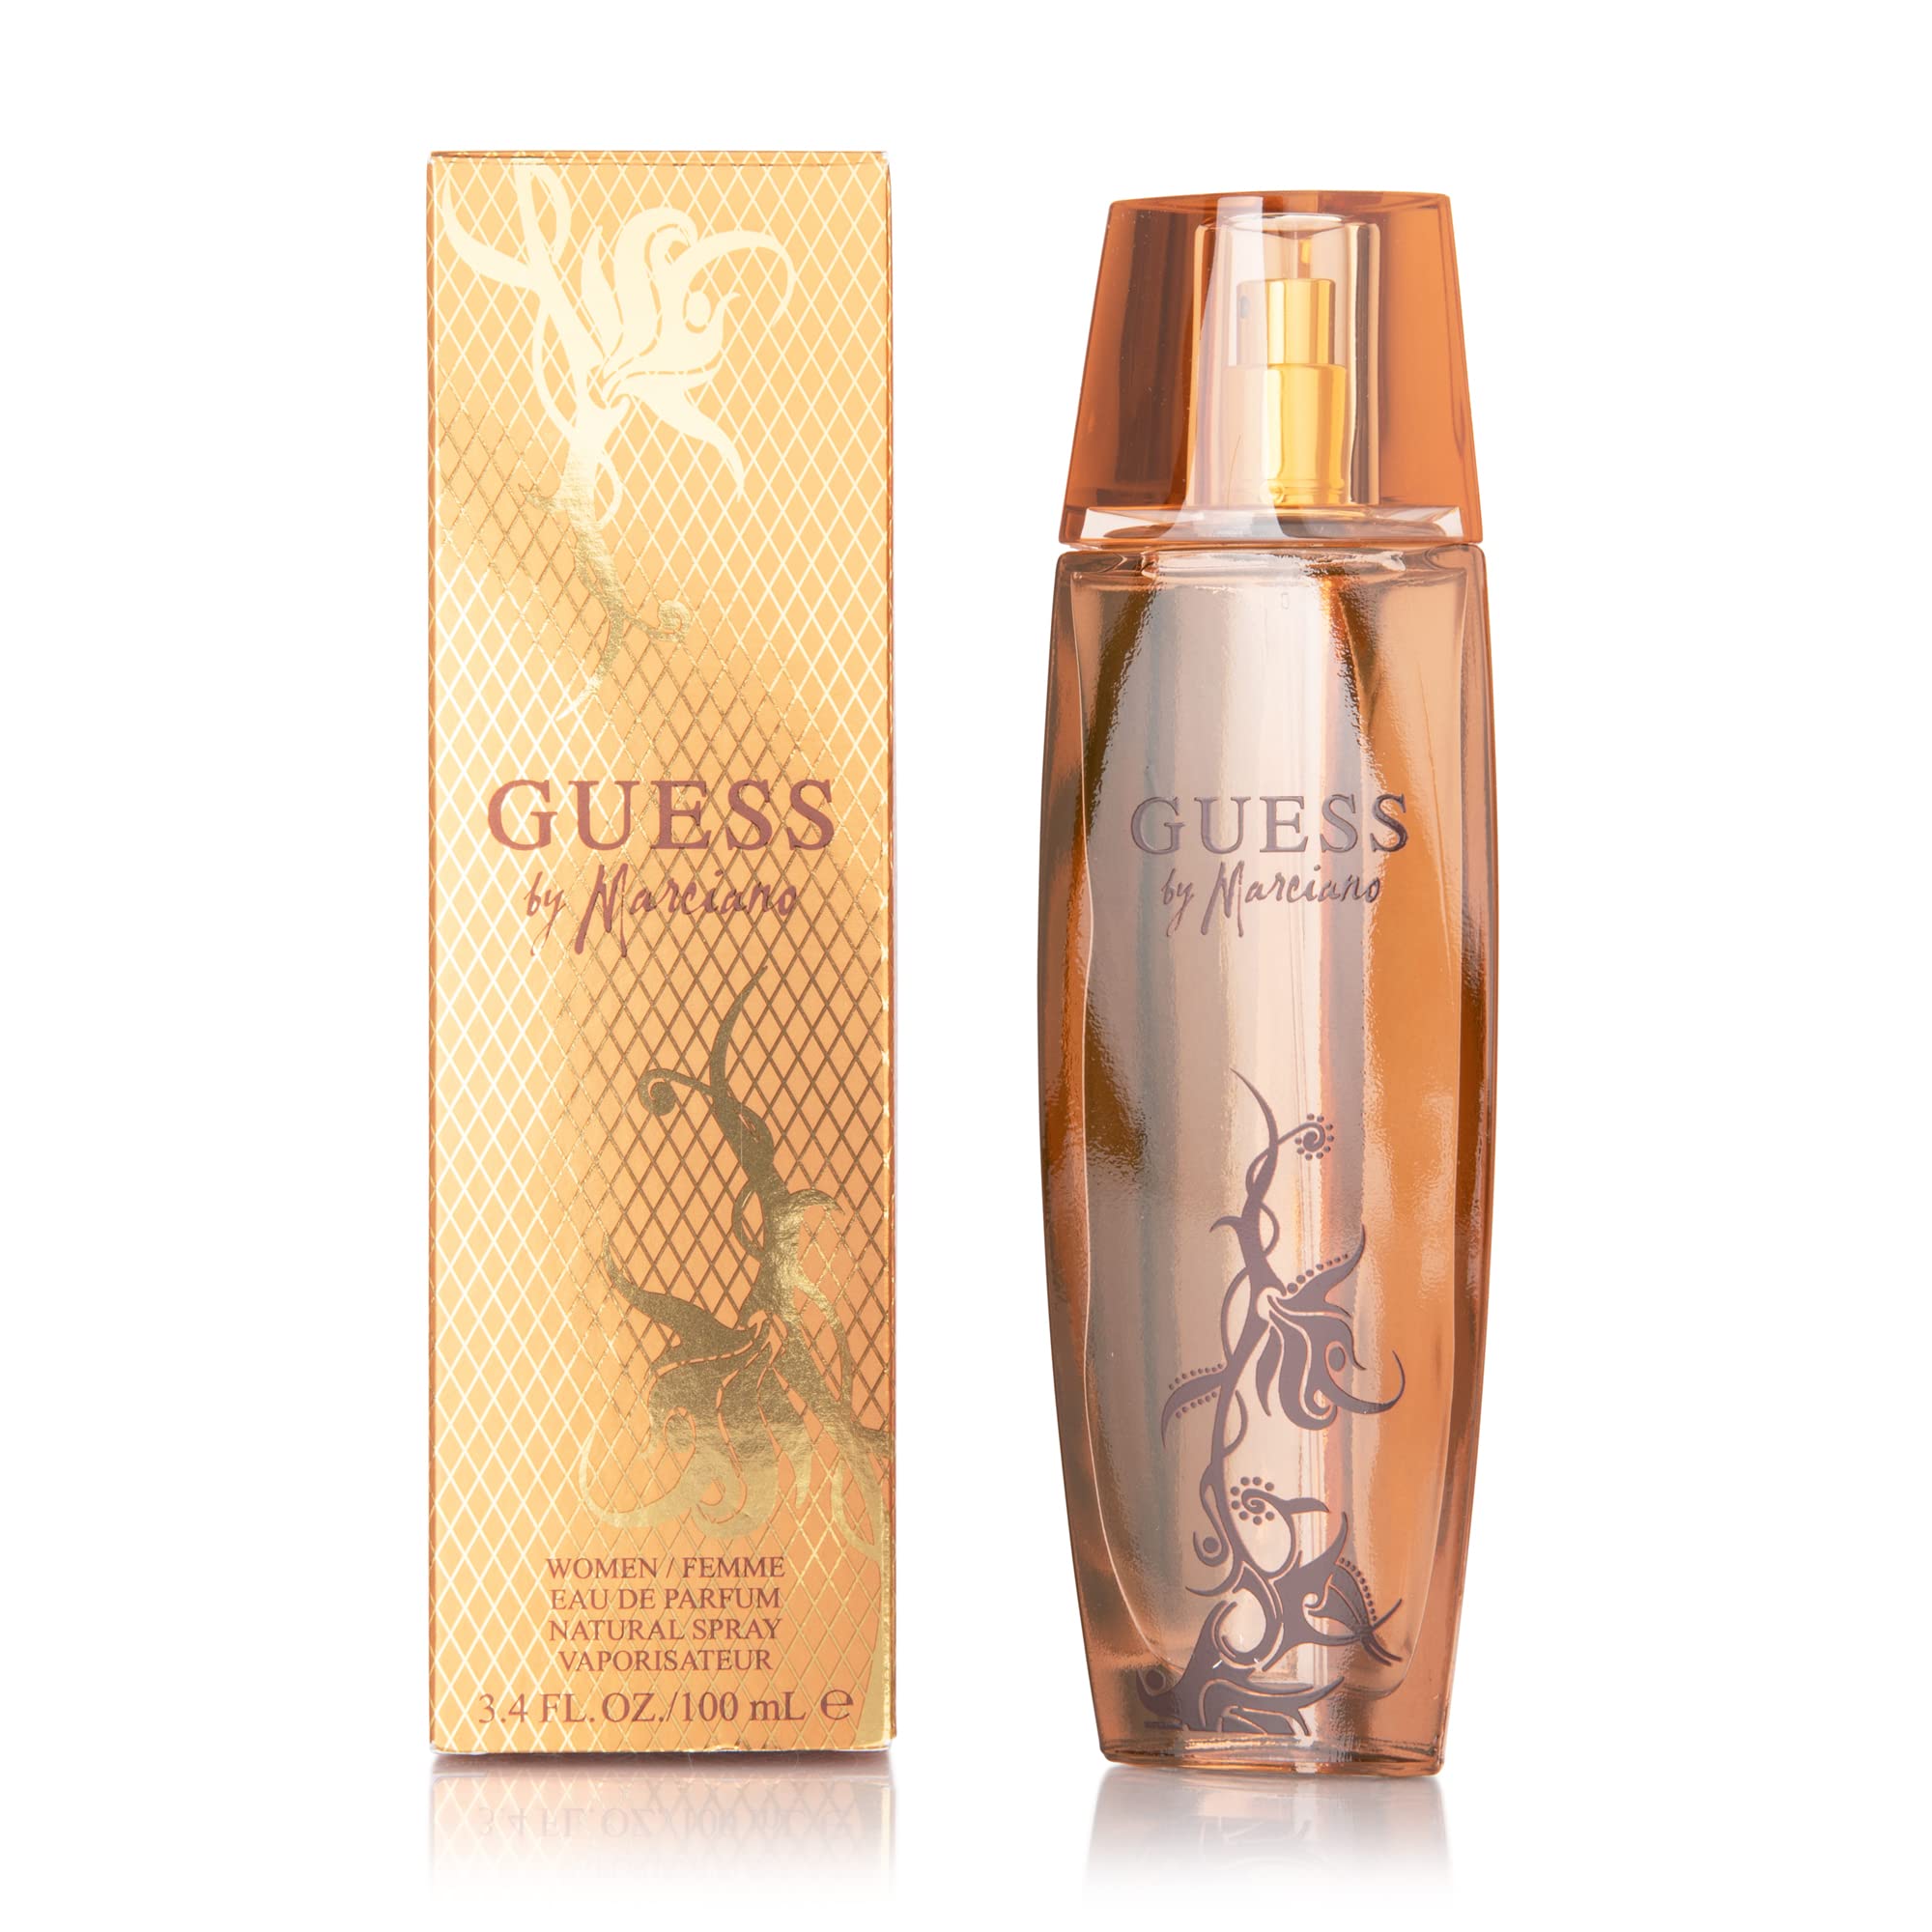 Populaire Guess By Marciano Woman Ep 100 Vp 6ALPqFiJR p